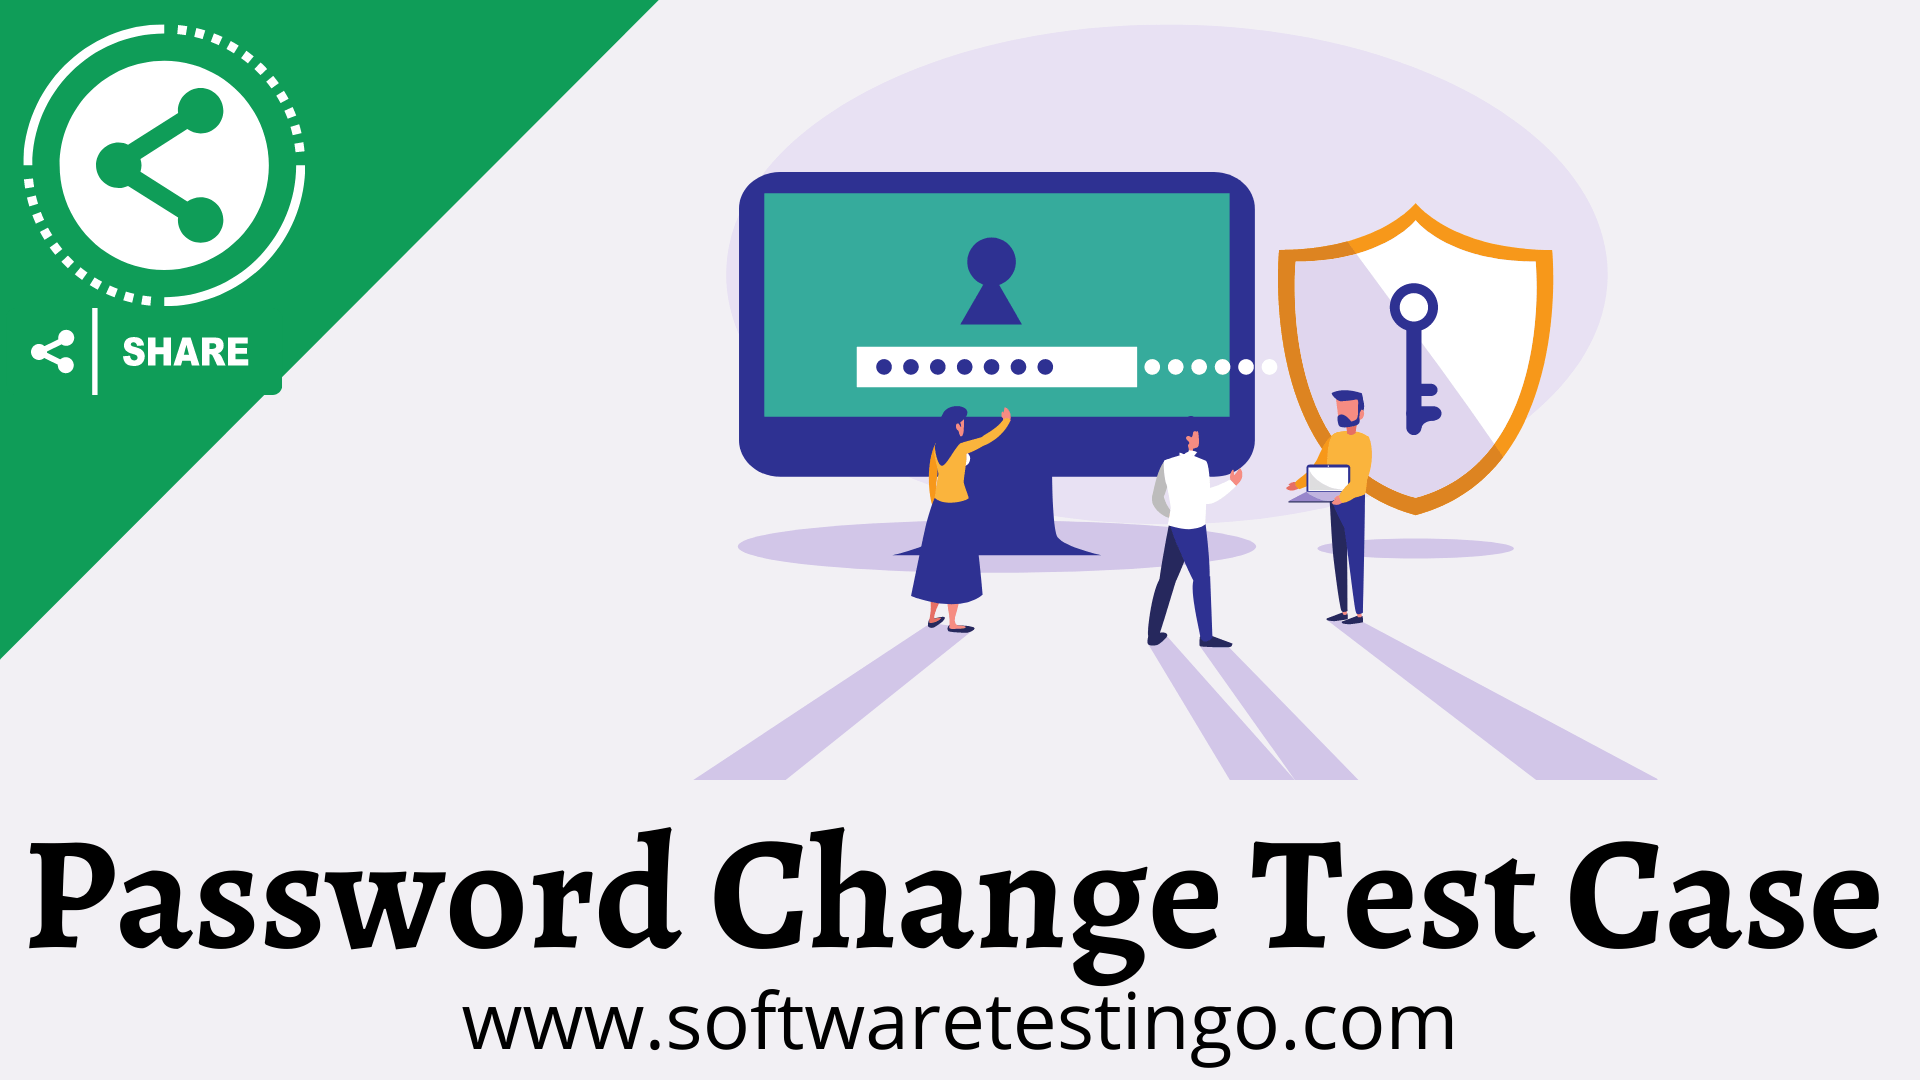 Test Cases For Change Password